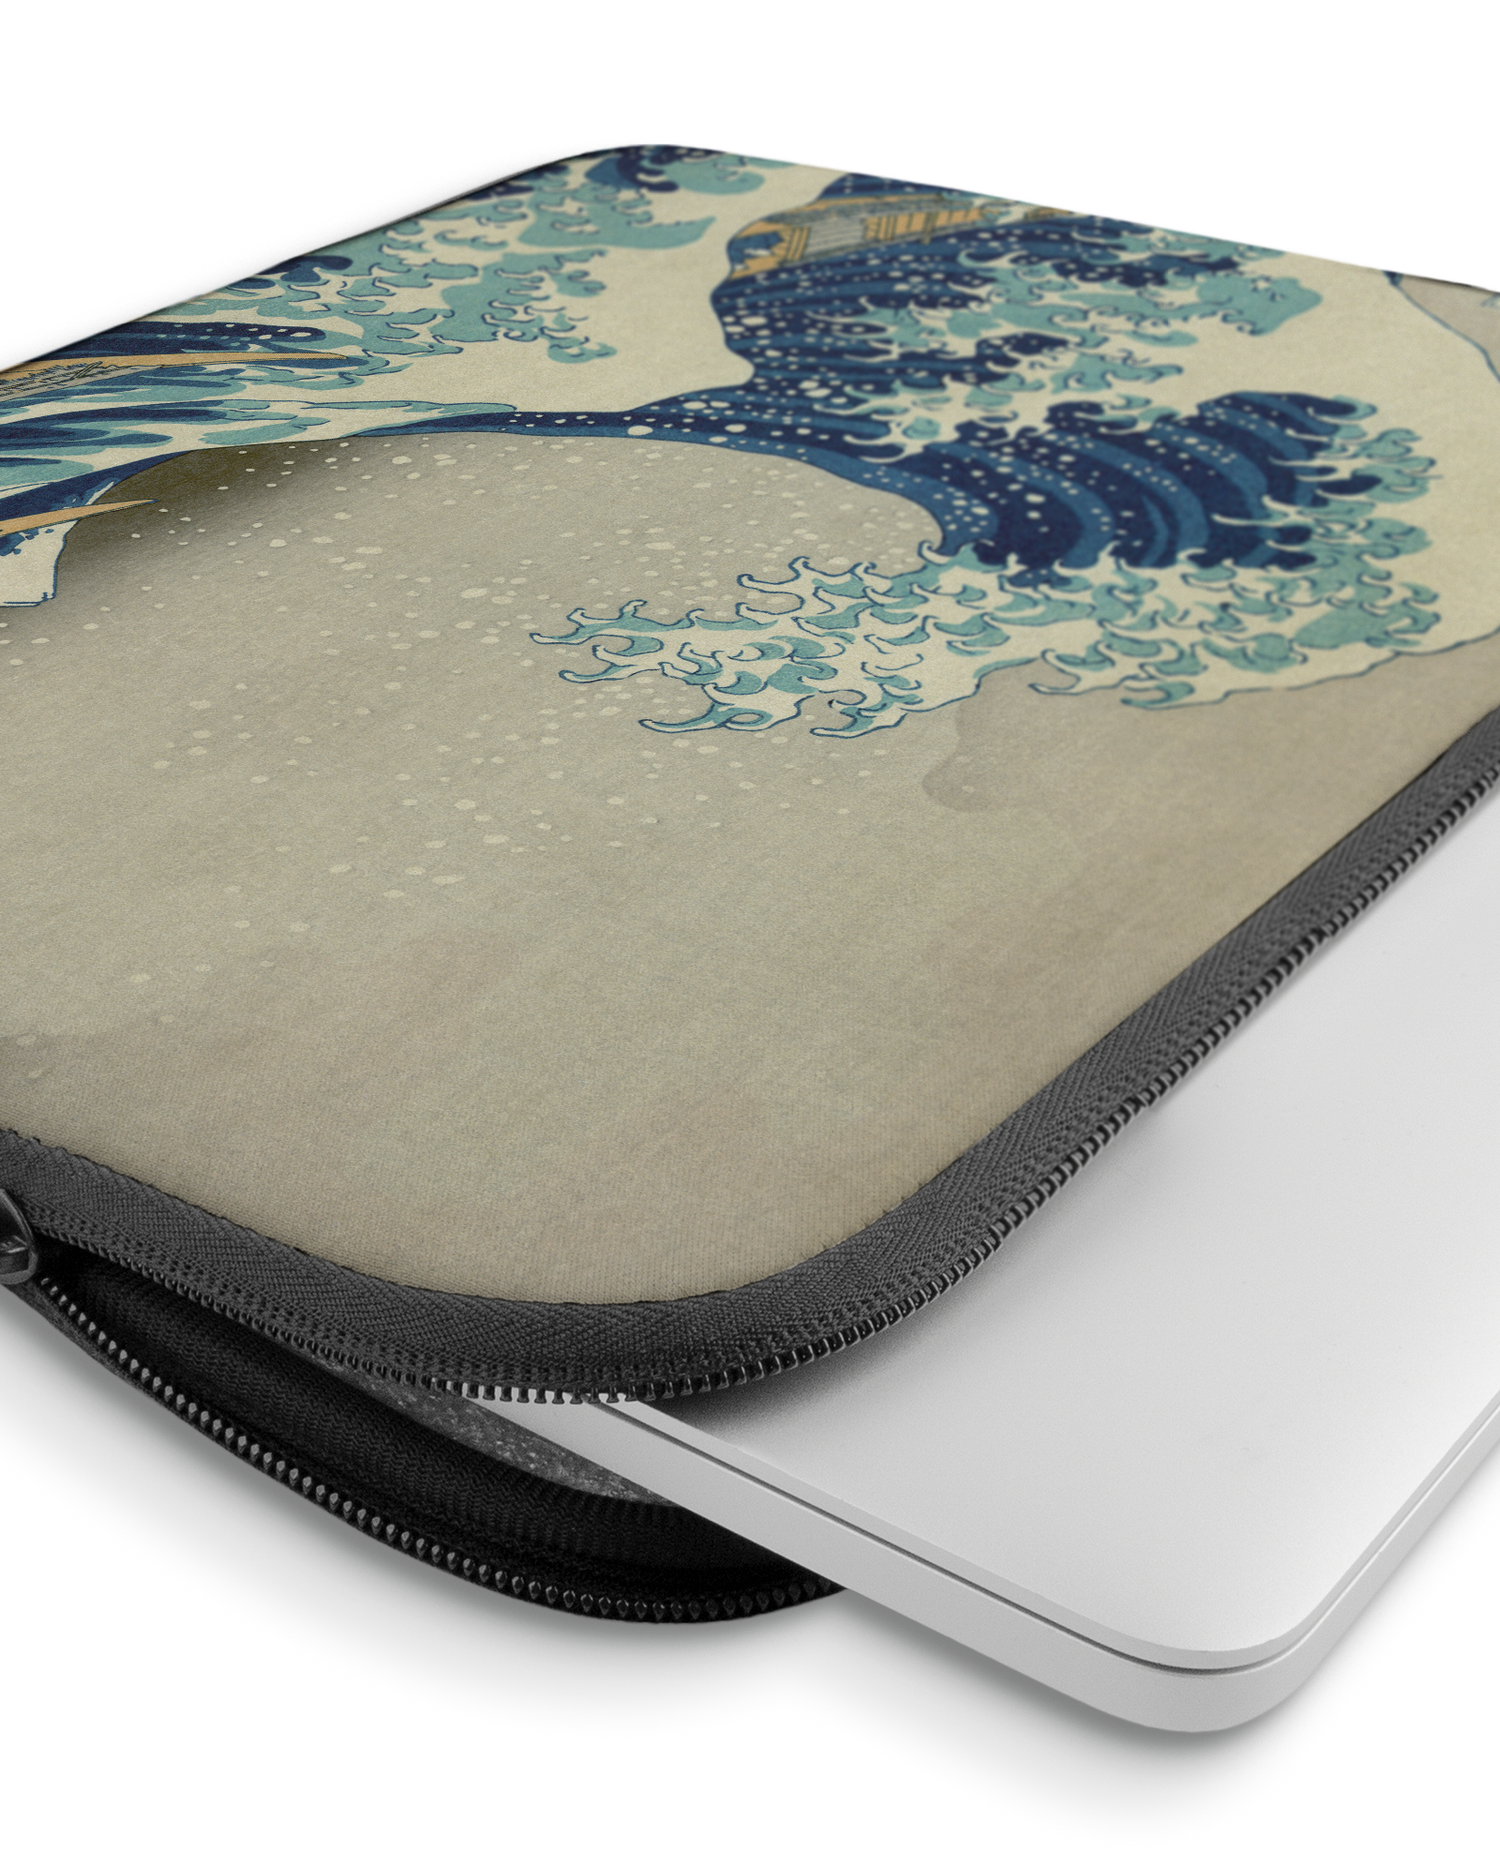 Great Wave Off Kanagawa By Hokusai Laptop Case 15 inch with device inside